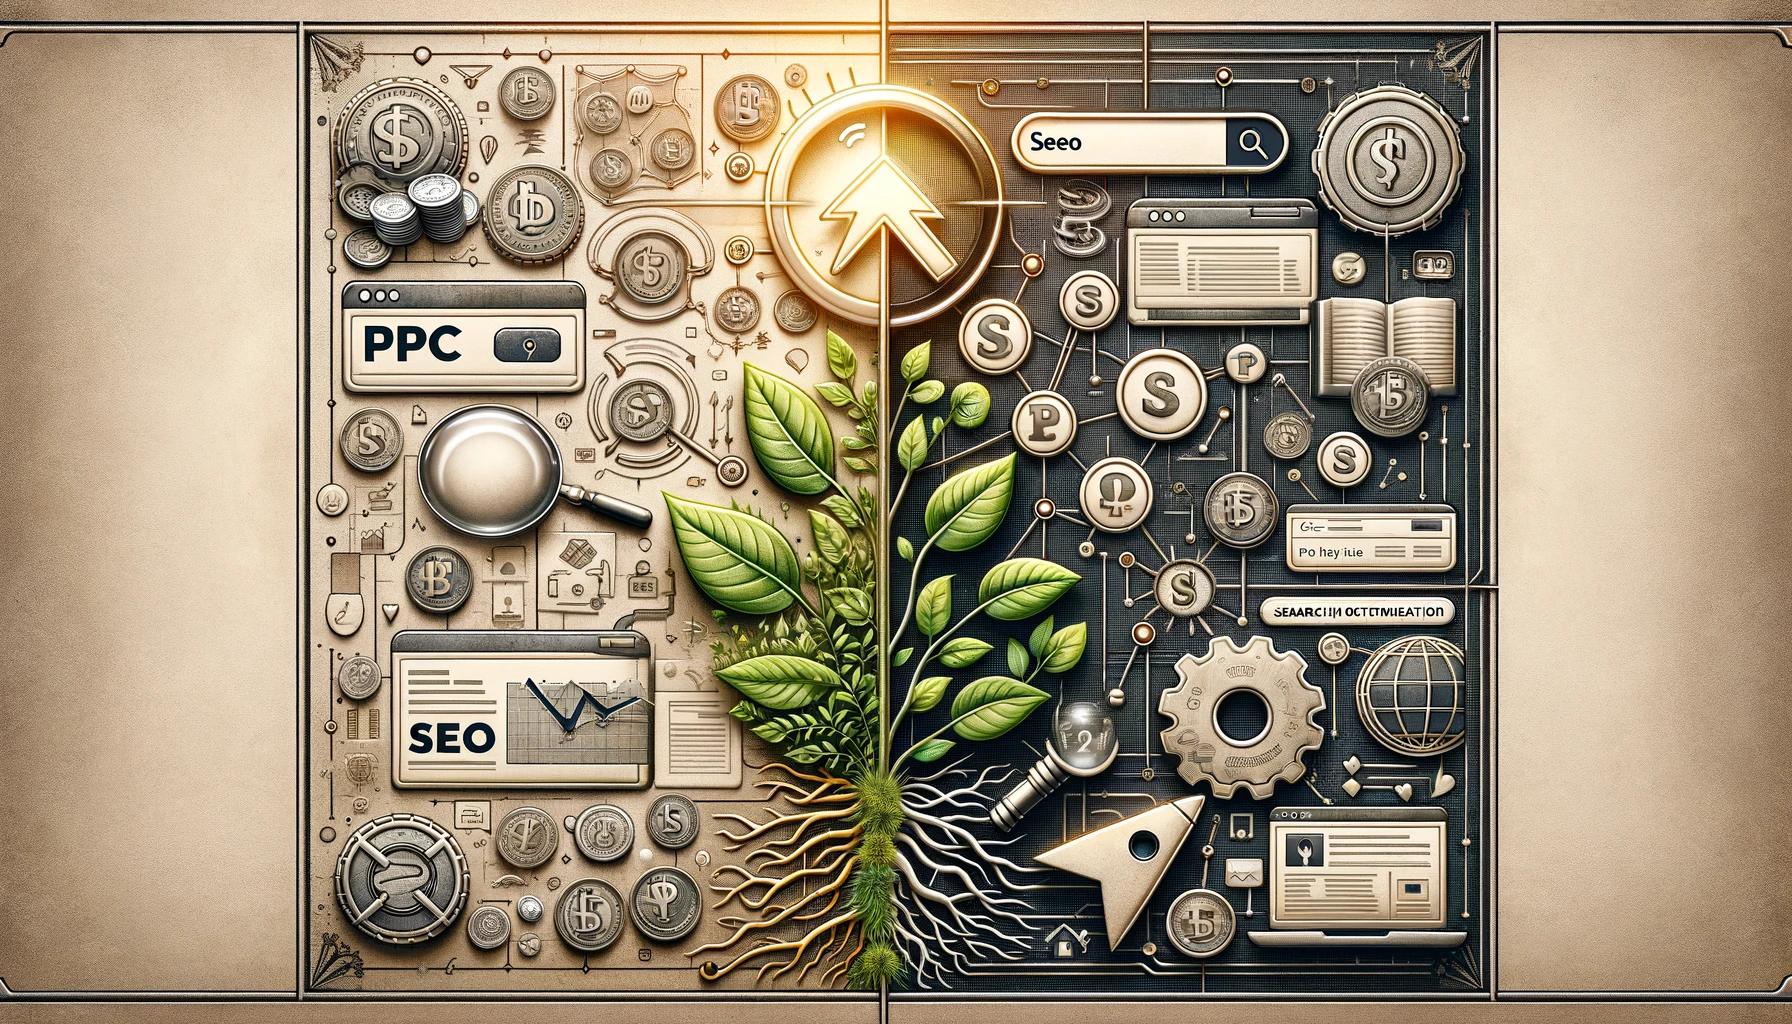 Digital marketing strategies contrast with PPC symbols on the left and SEO elements on the right, showcasing their integration in the center.